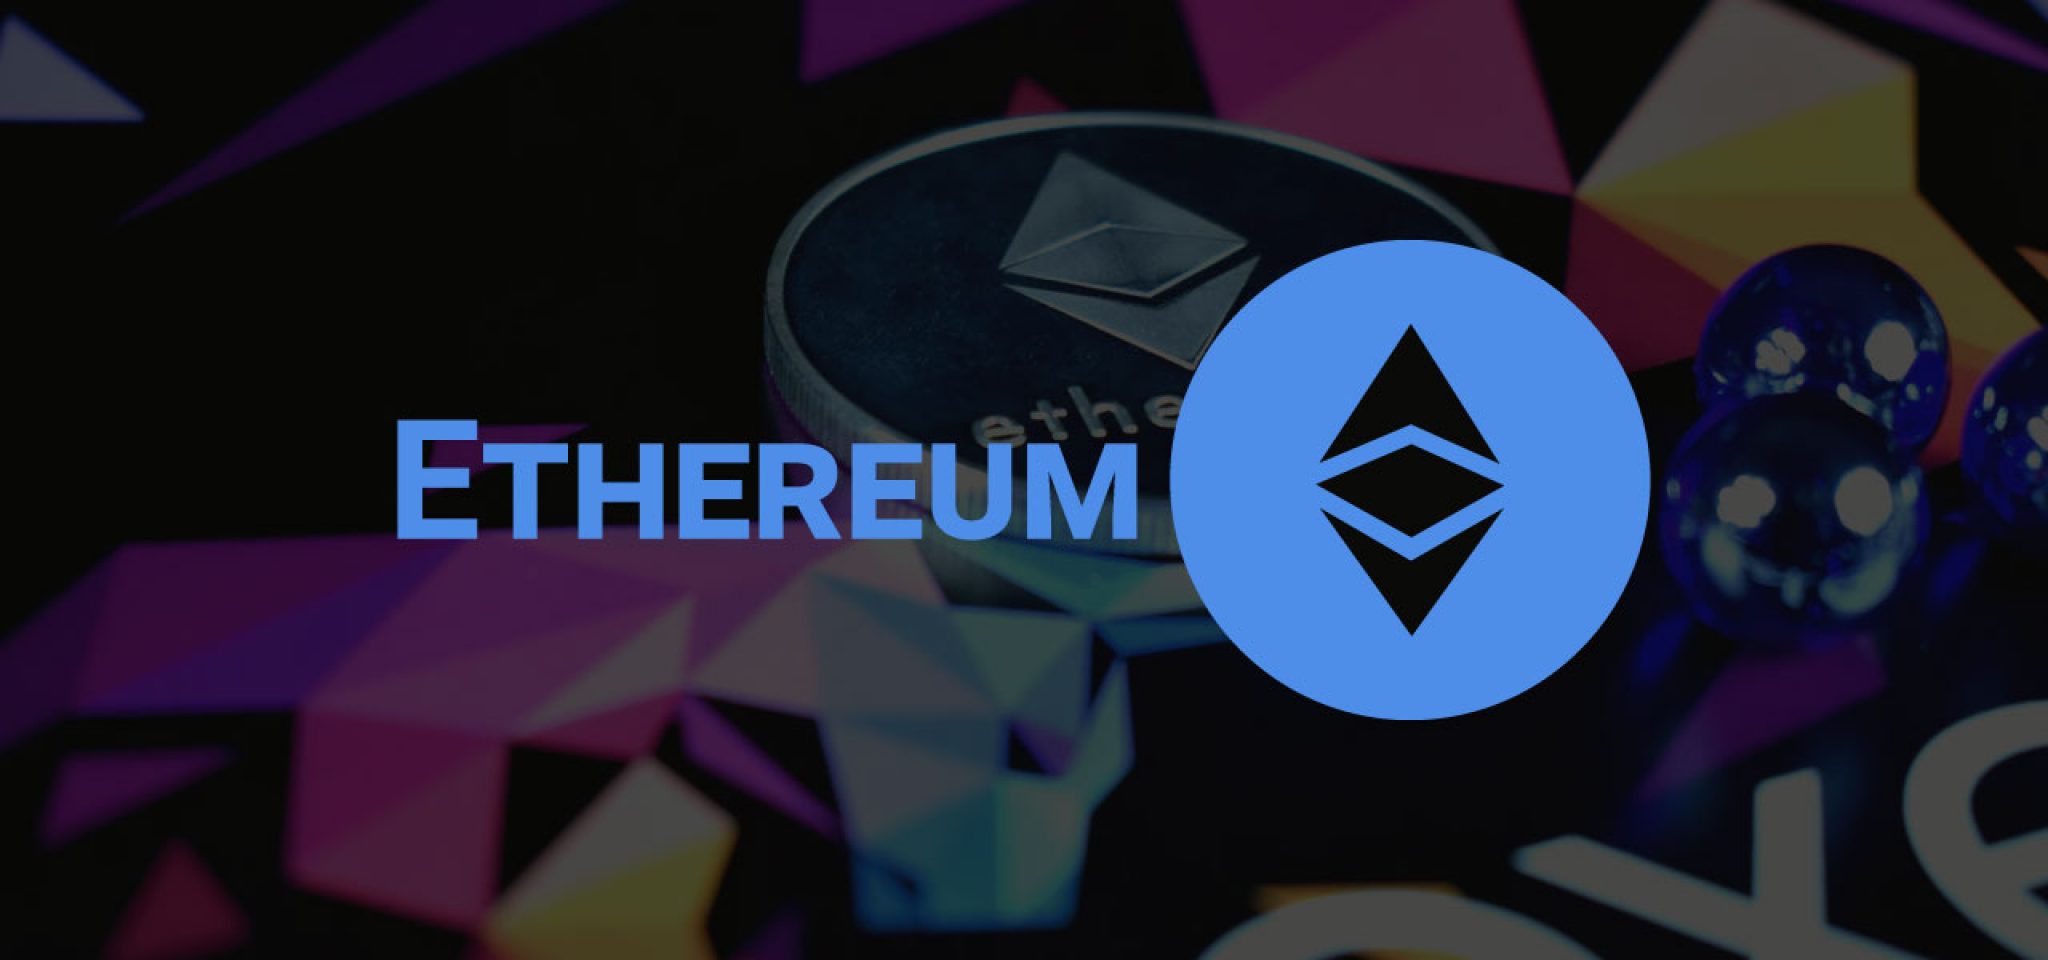 free ethereum course